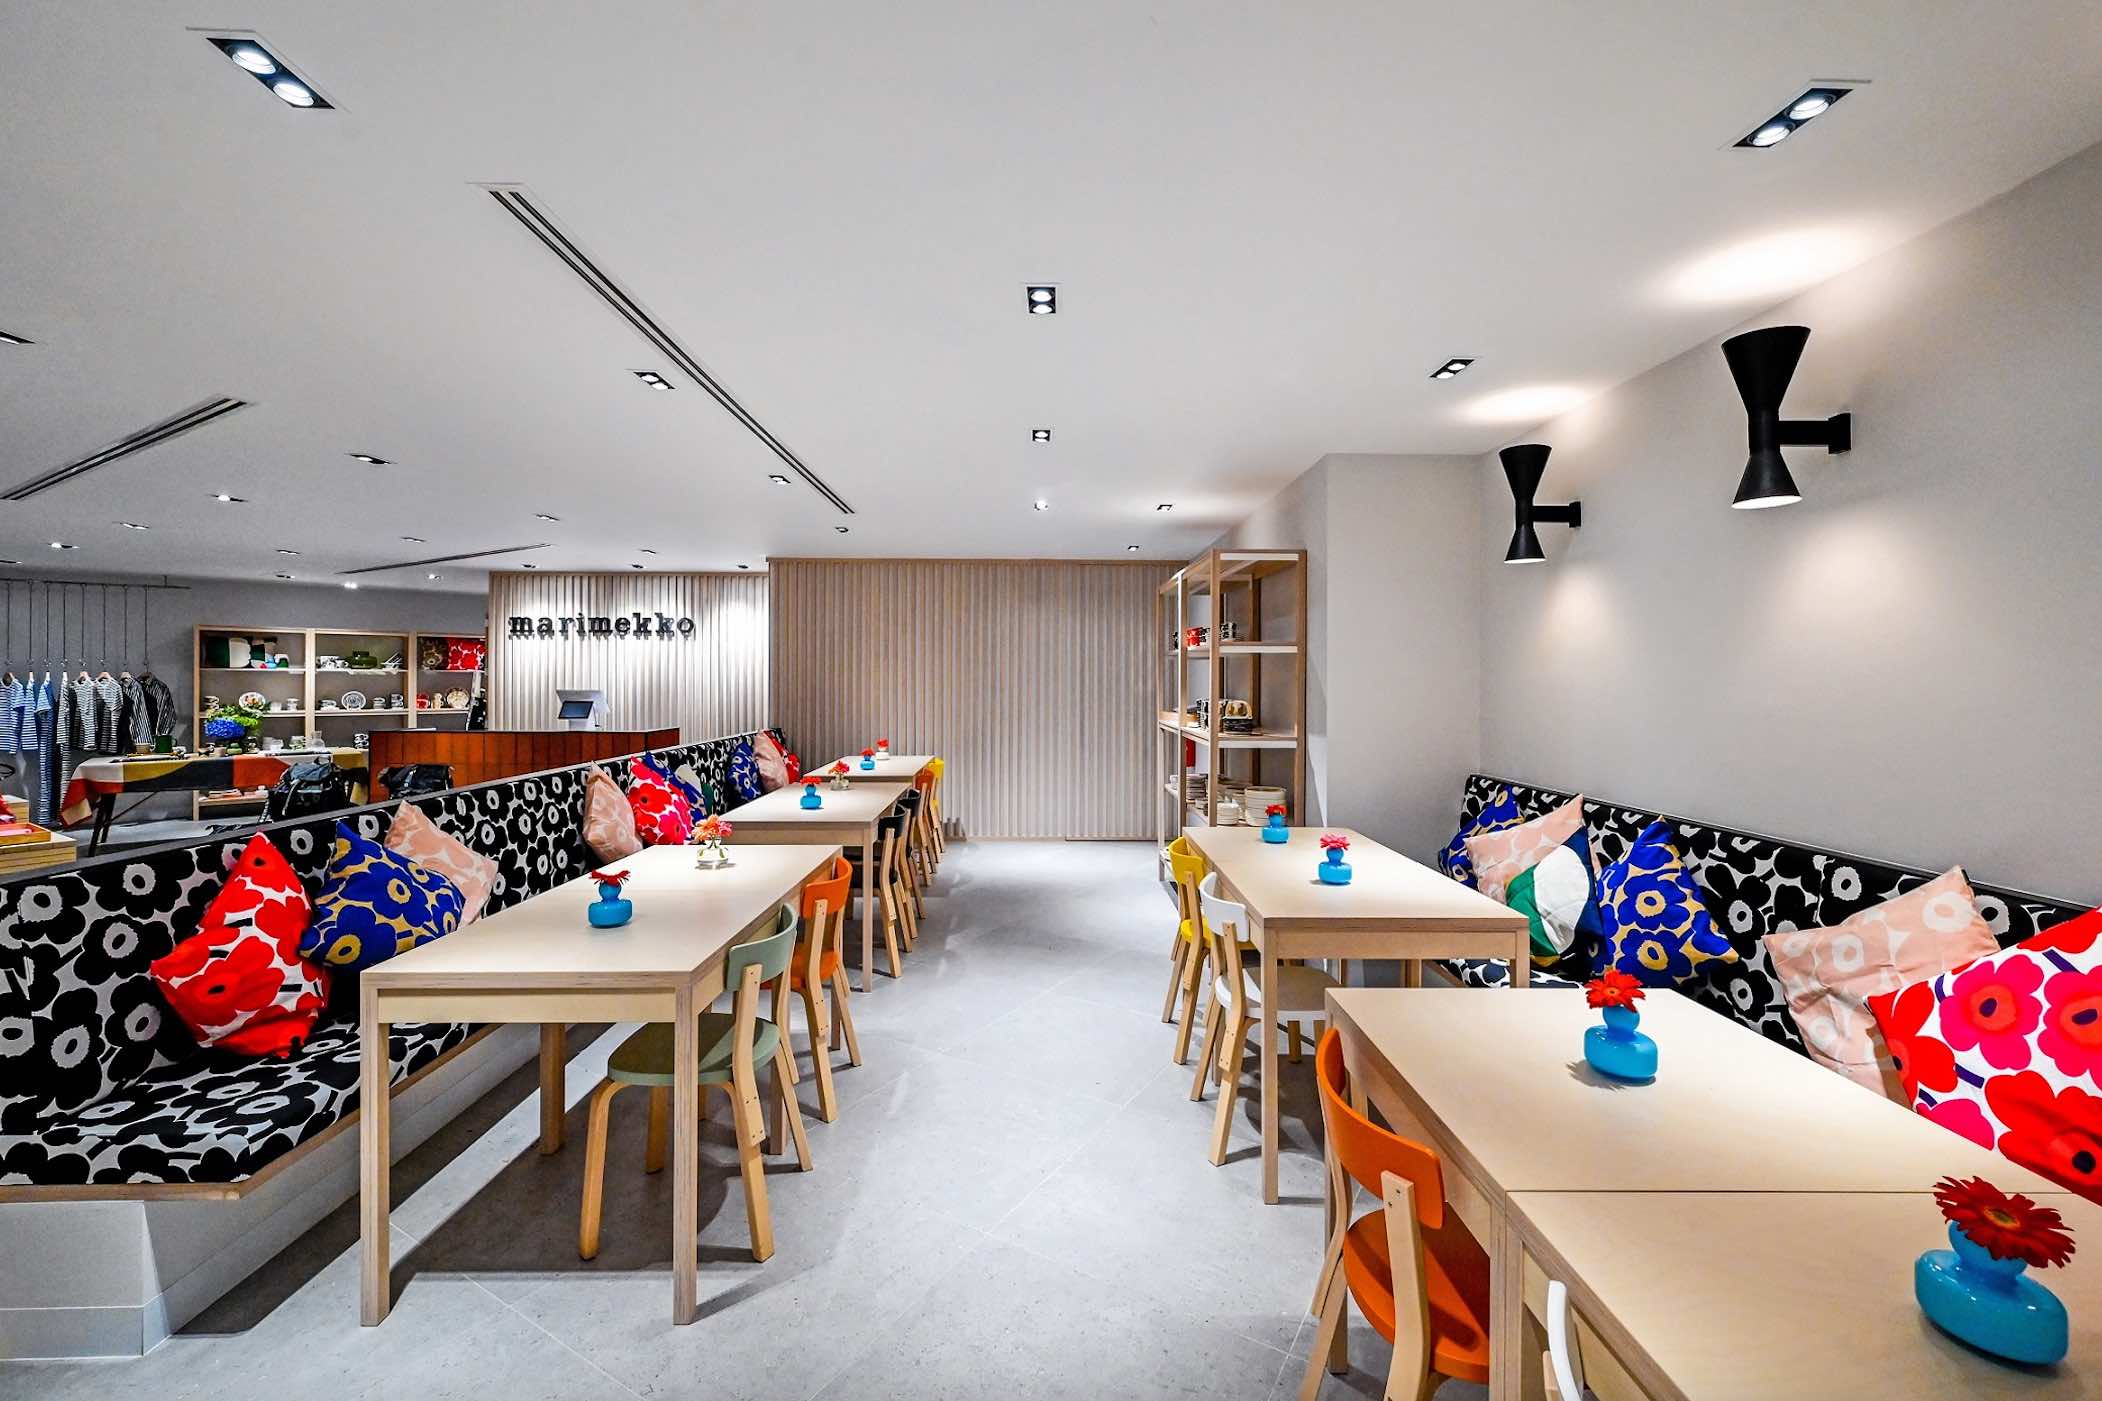 , The Happy Prints: Marimekko’s flagship store blends fashion, home decor and cafe culture